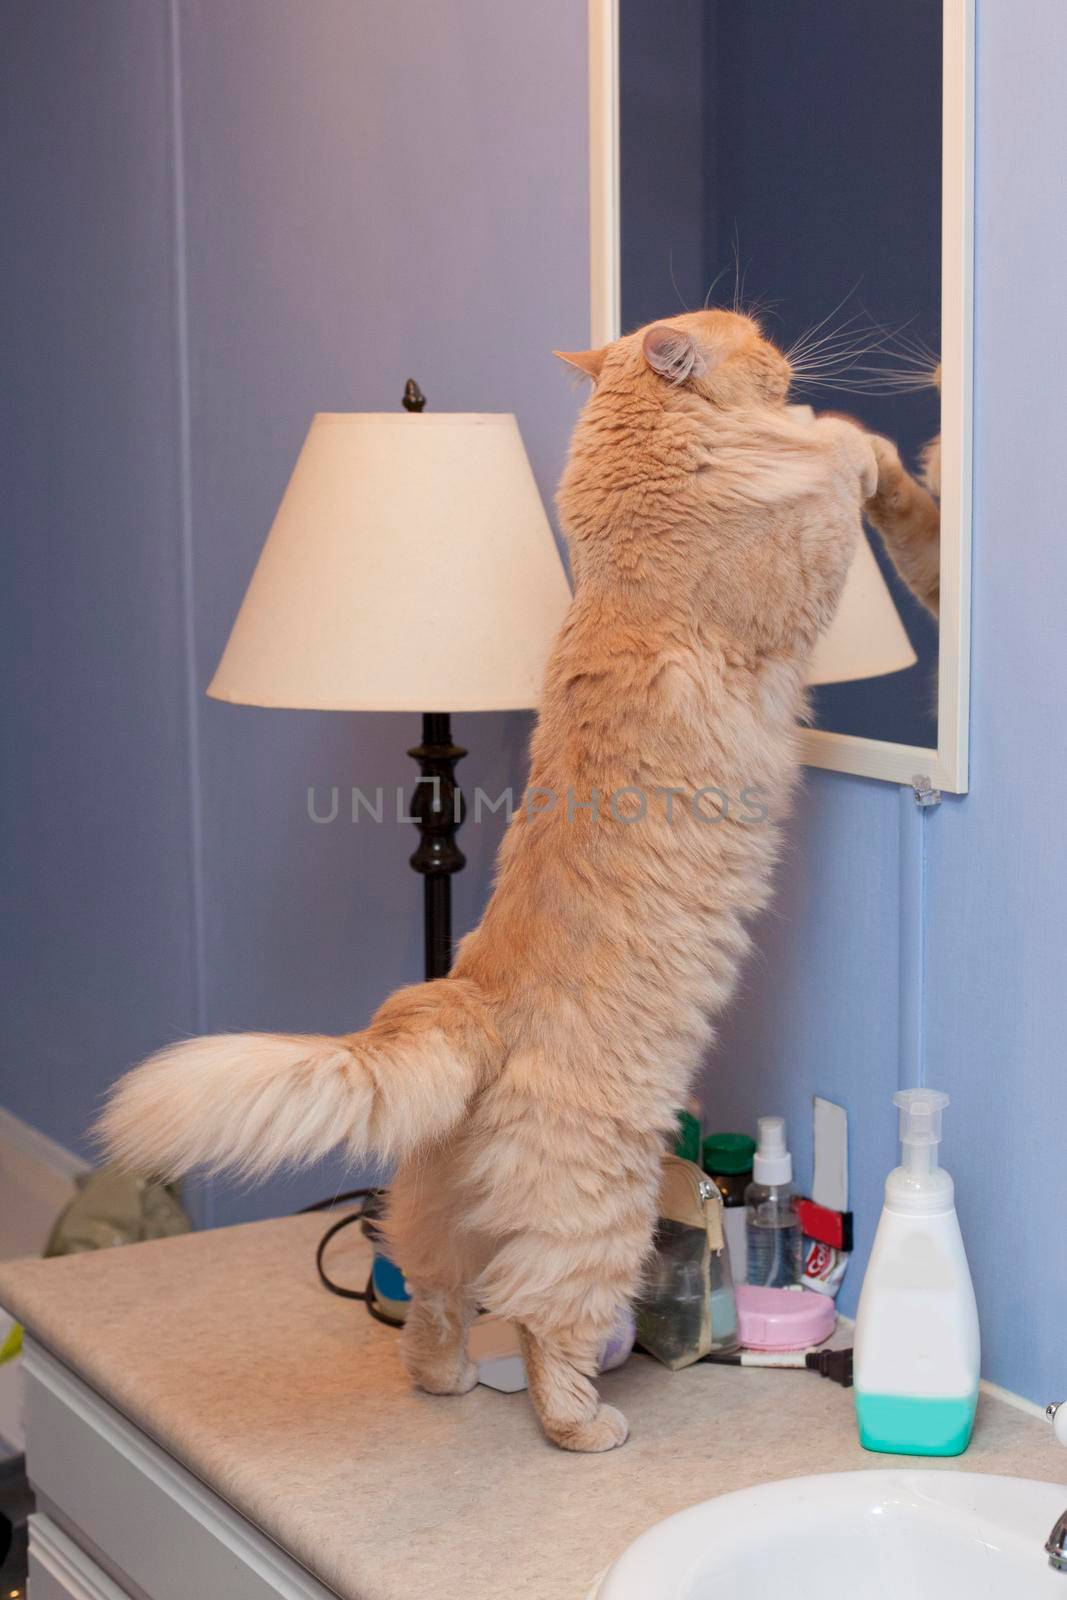 A silly cat checks out its reflection in the bathroom mirror 